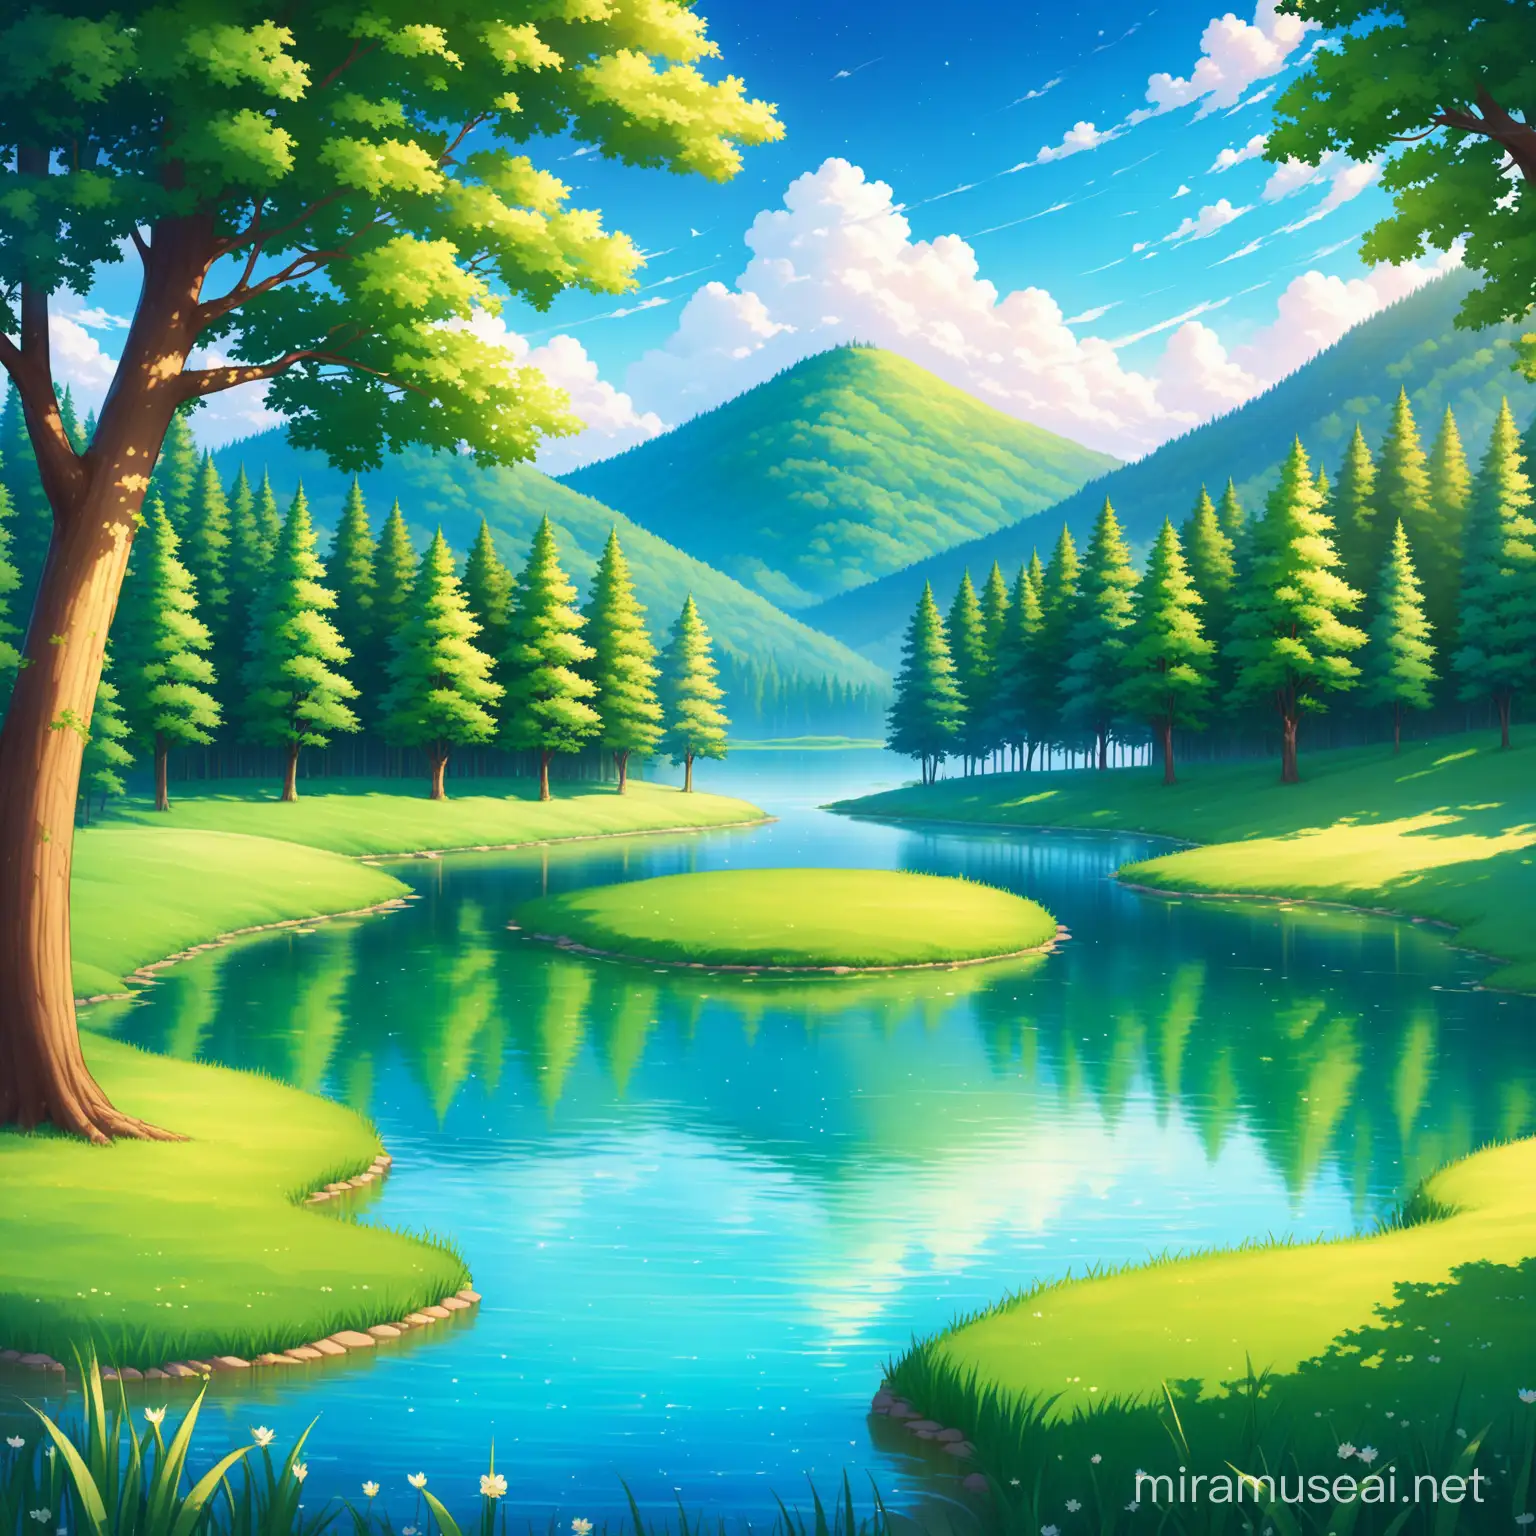 CREATE AN IMAGE THERE IA A MAGICAL  POND BETWEEN THE FOREST AND 2 HILLS ARE NEAR OF THAT POND